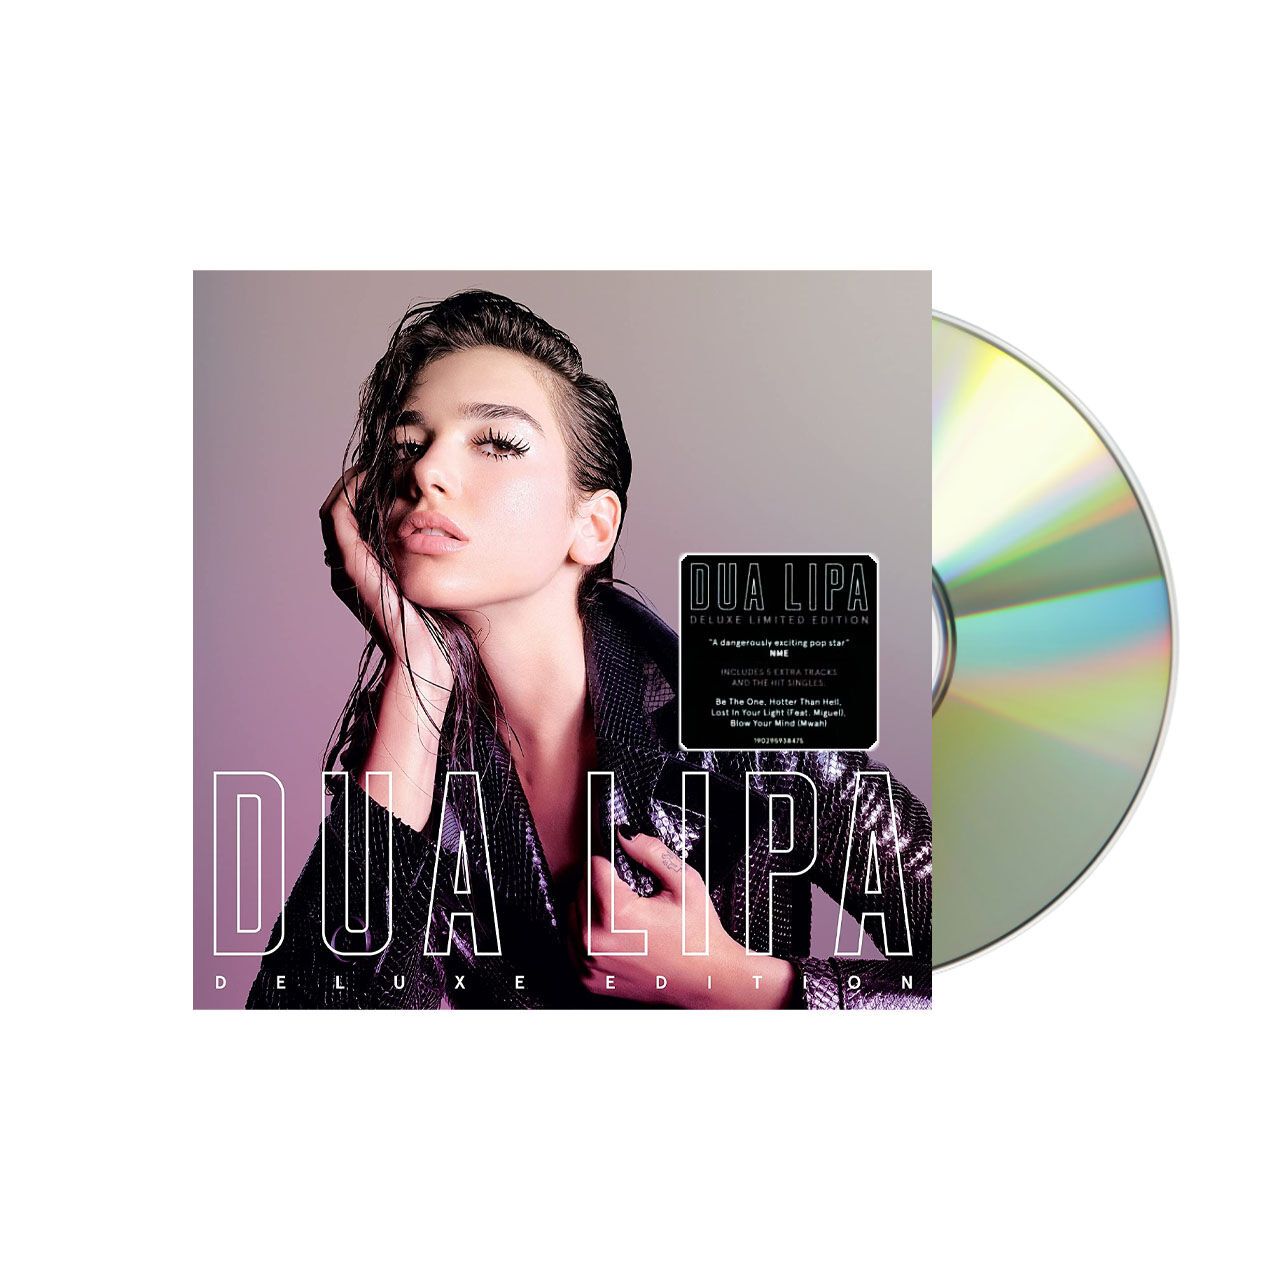 DUA LIPA Self Titled Limited Edition Deluxe CD